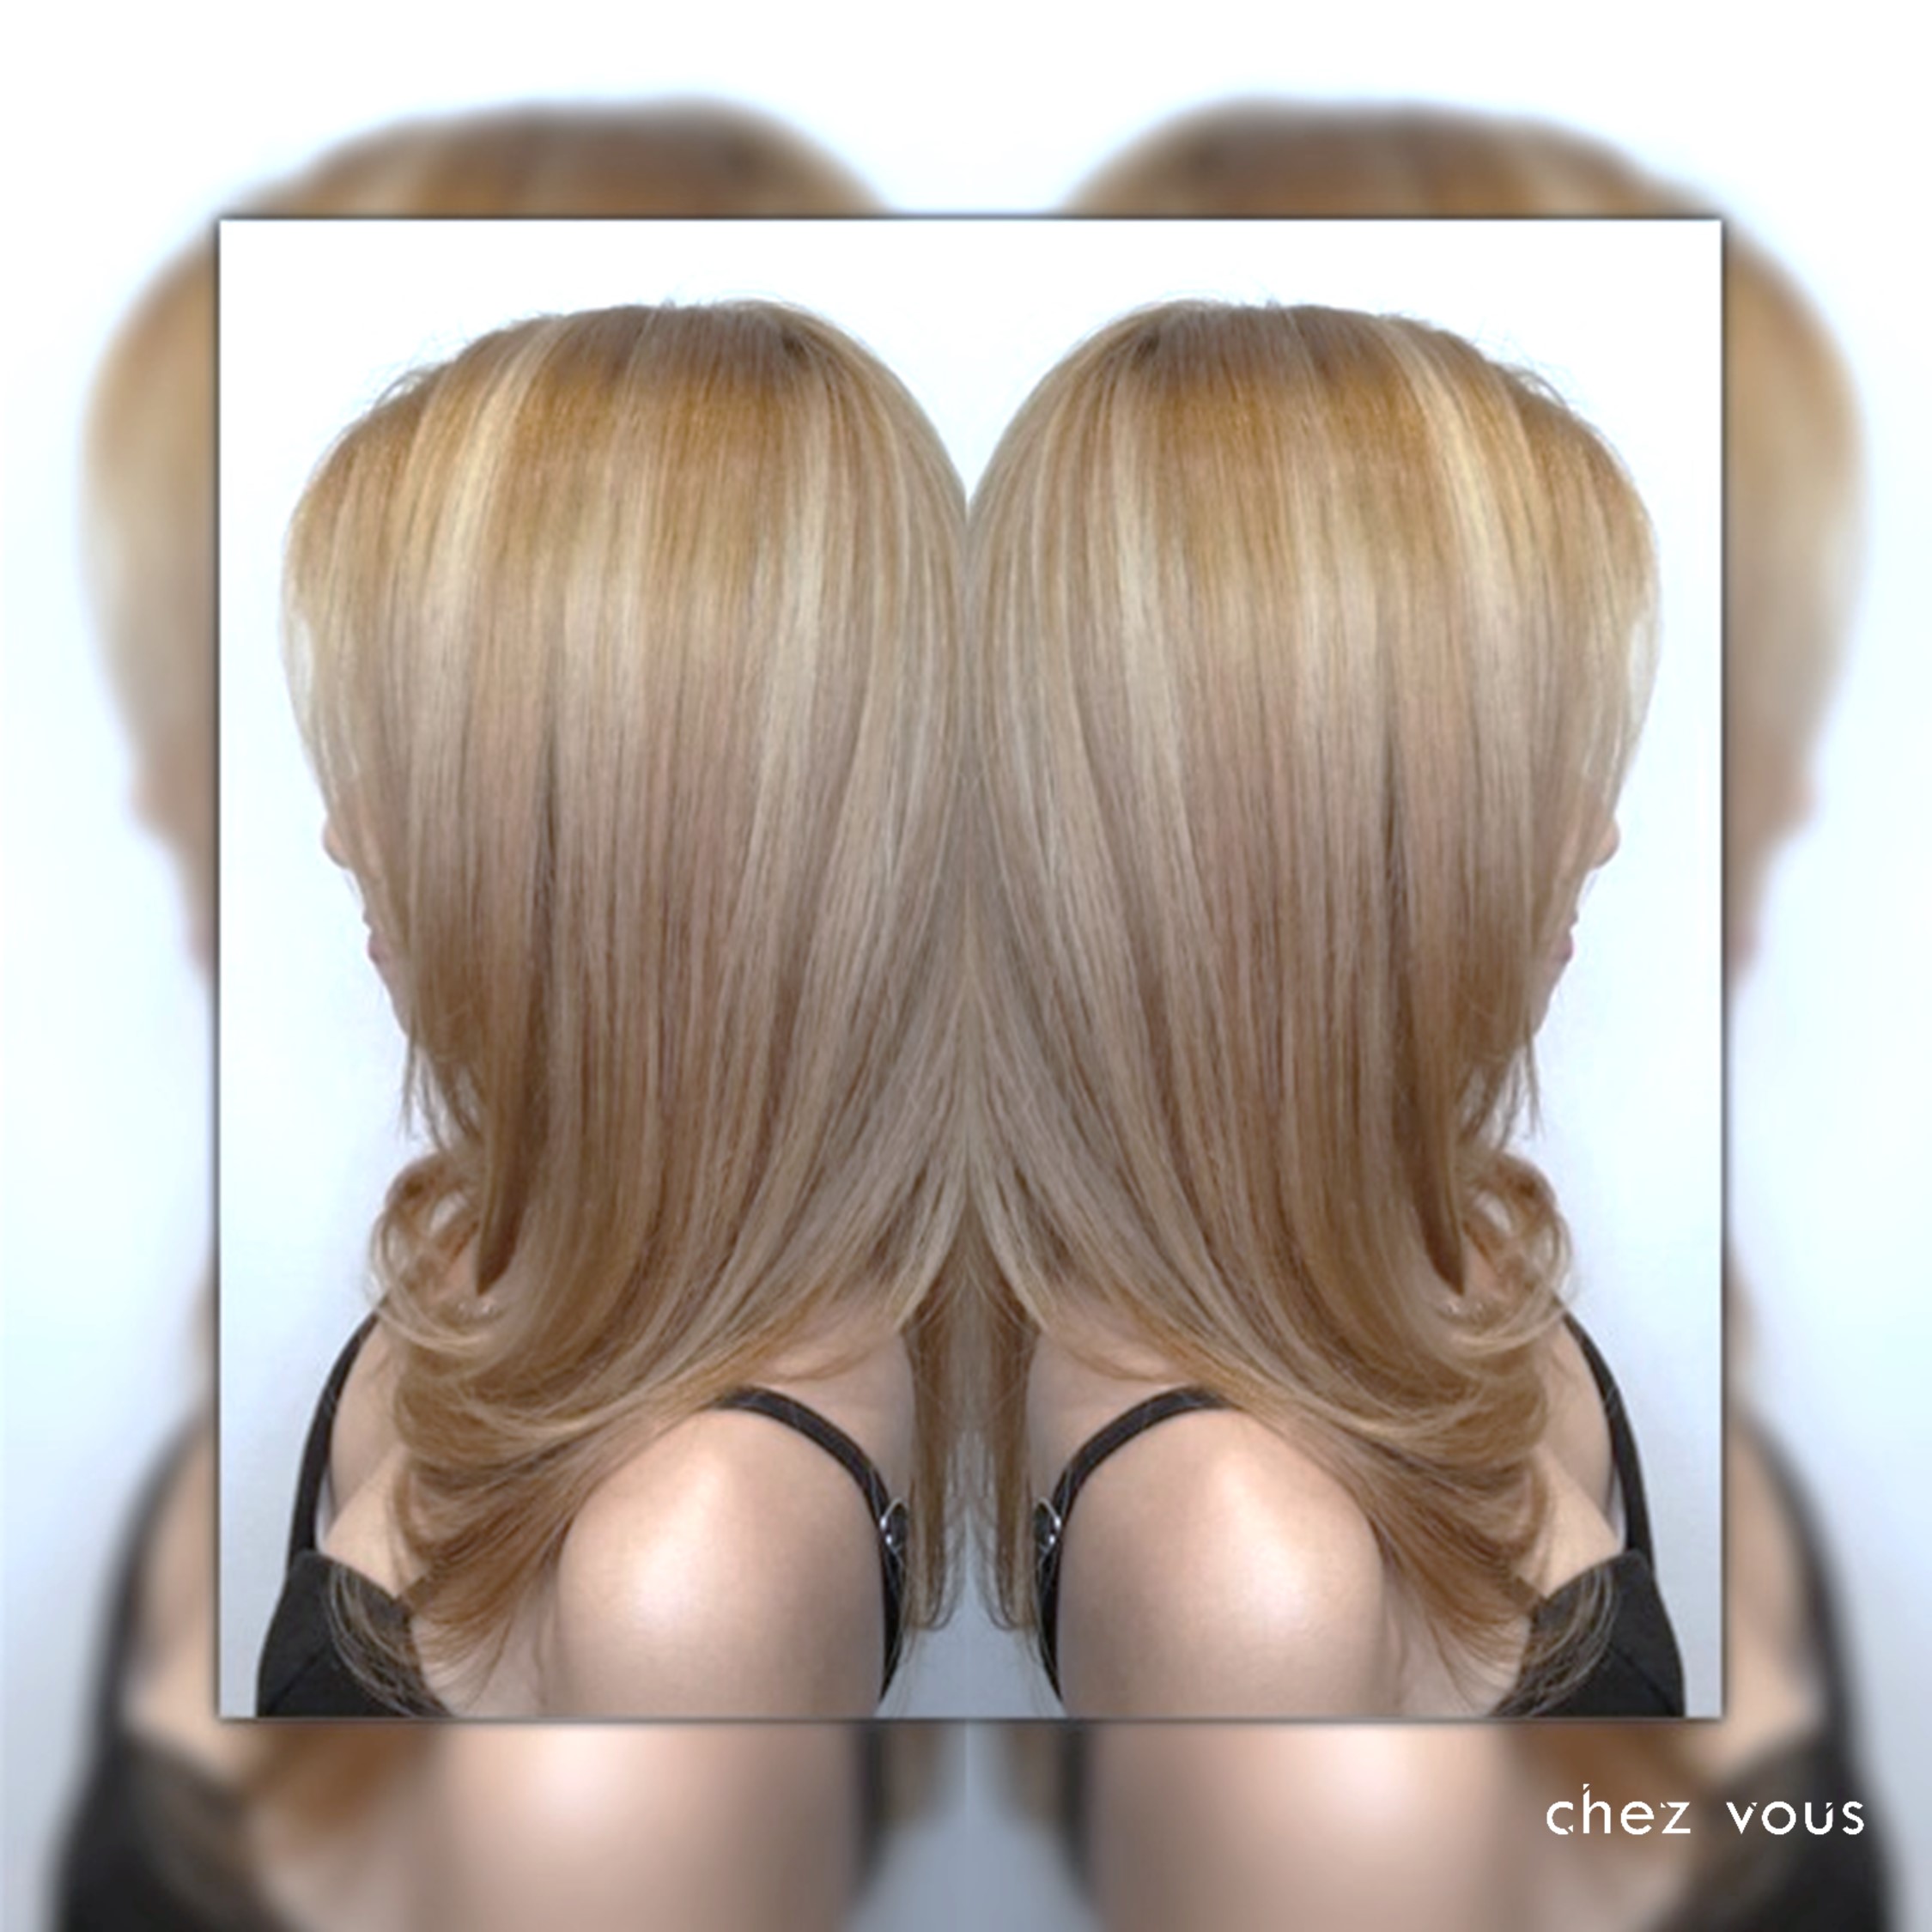 Done by Salon Director of Chez Vous: Serene Tan | Design: Buttery Beige Blonde Balayage